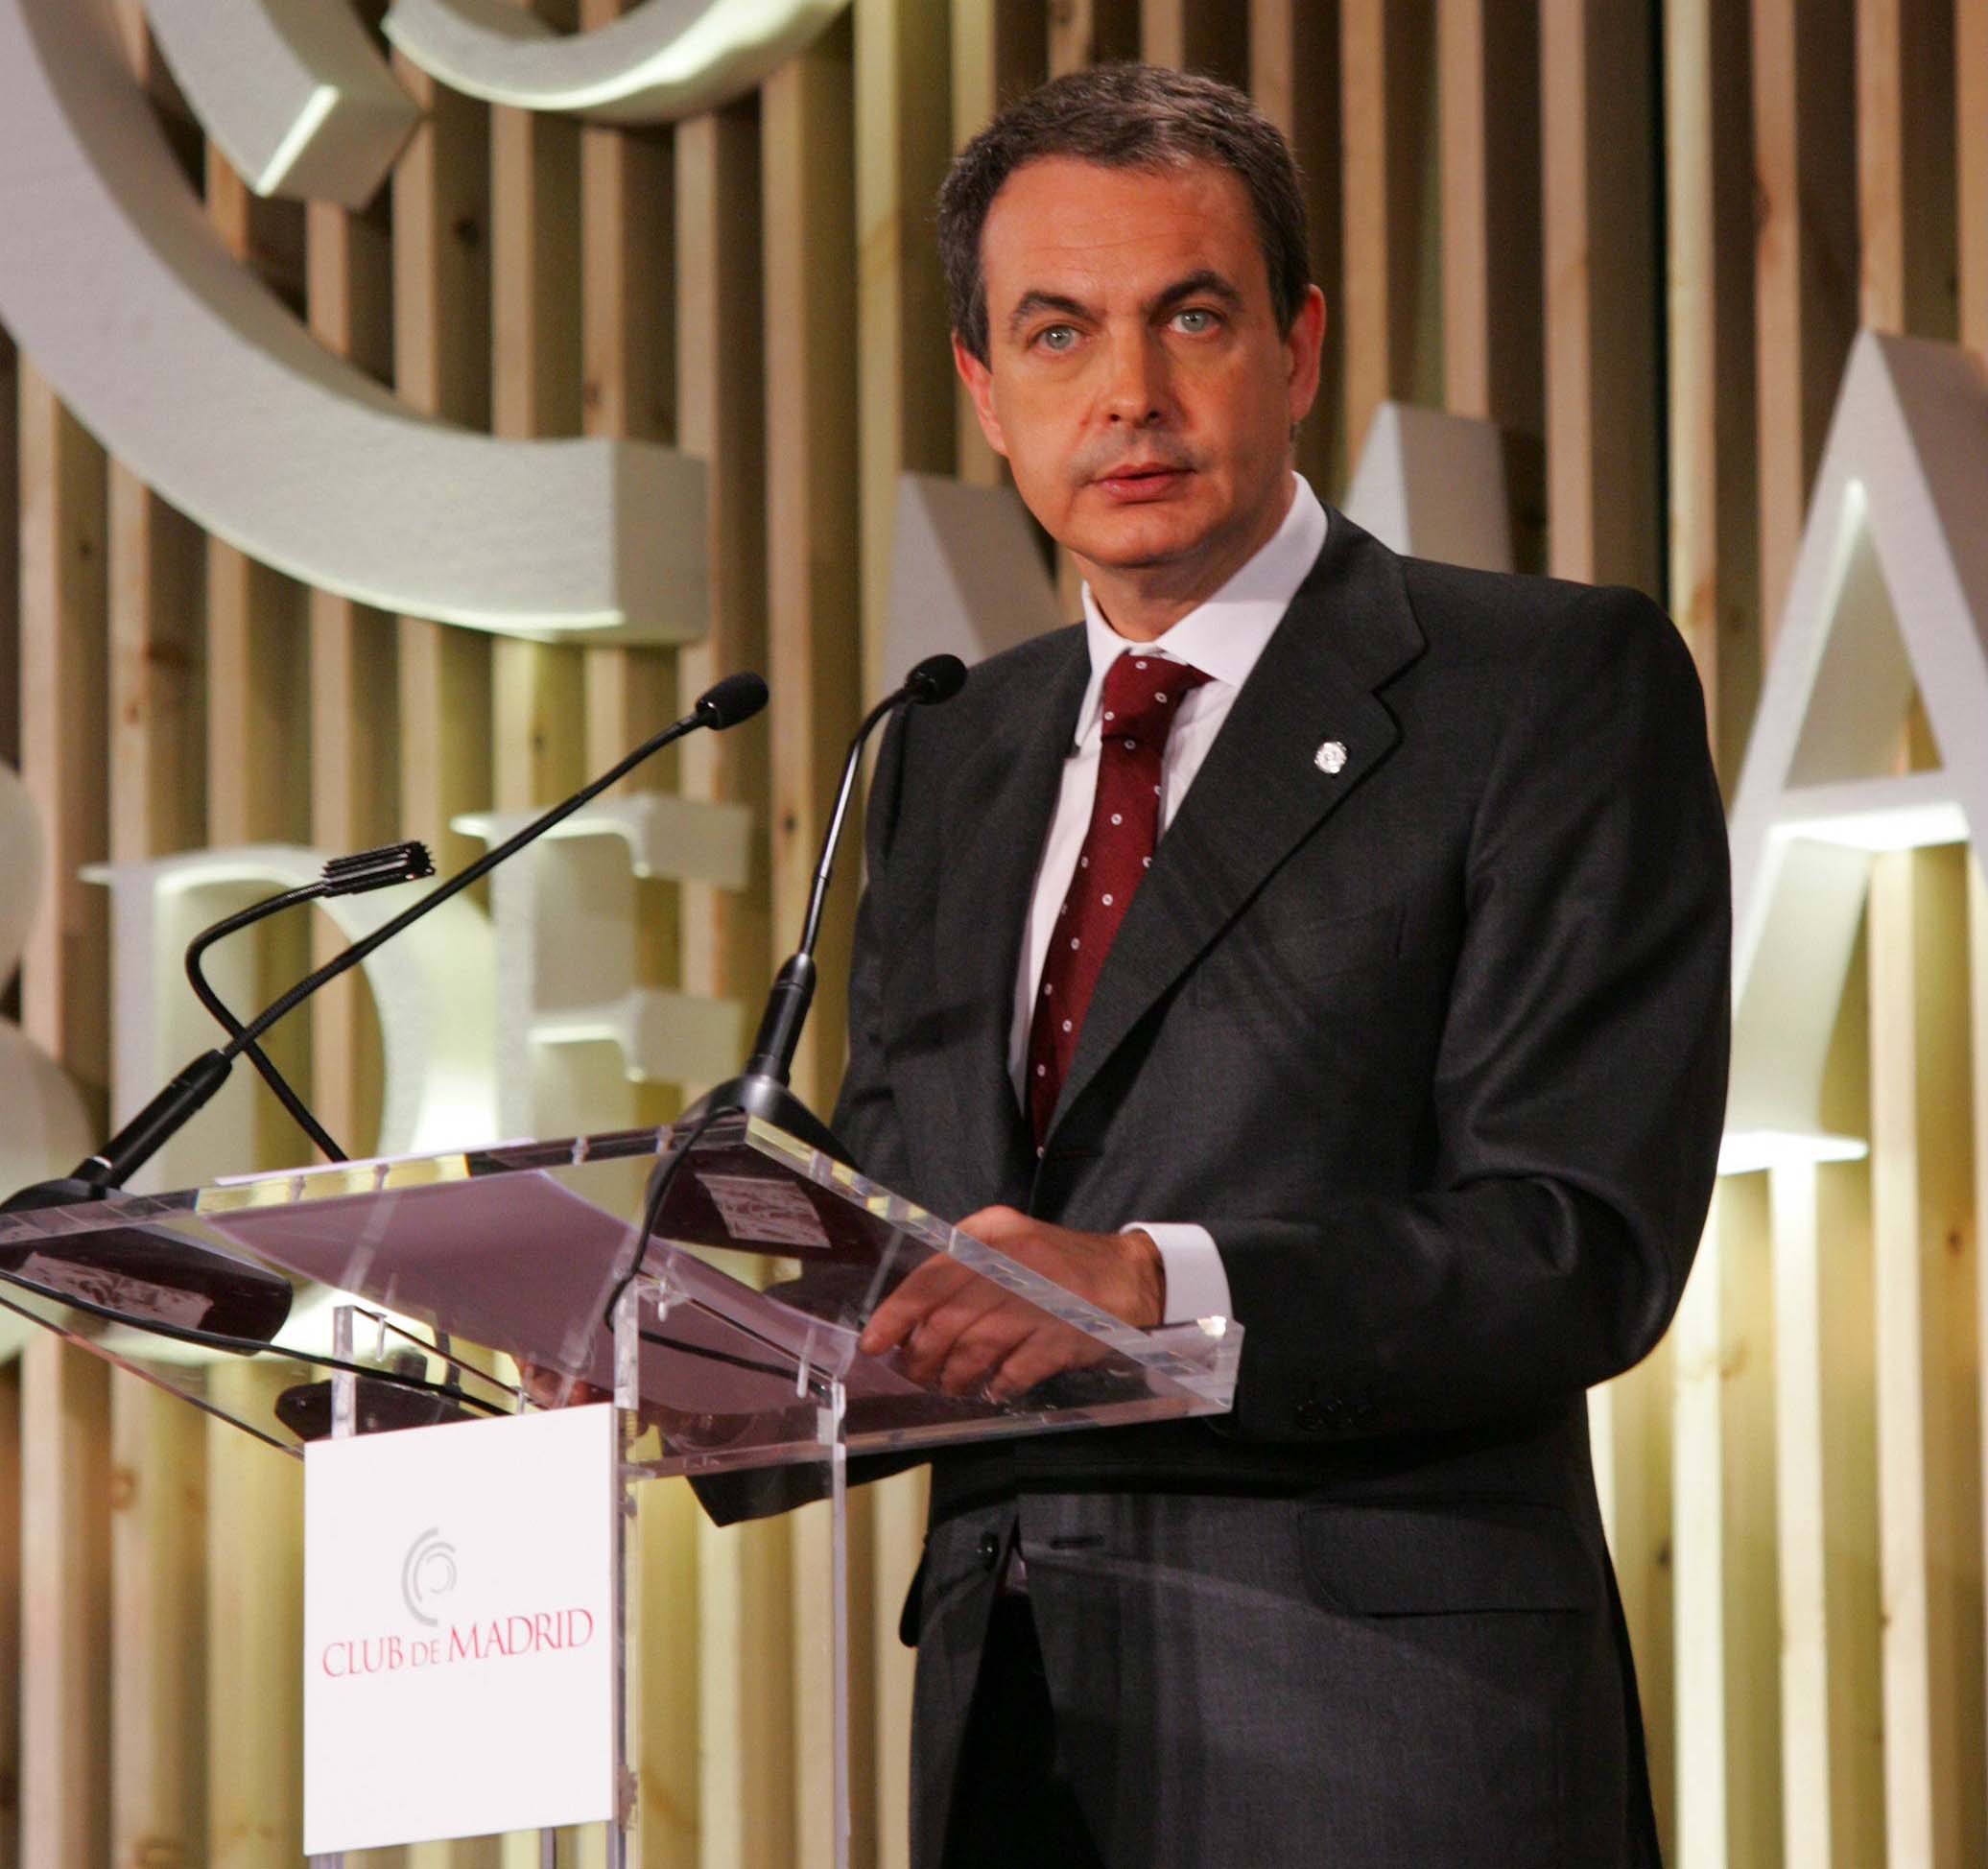 Former Spanish PM to lead Cape Verde mission to promote the rights of domestic workers